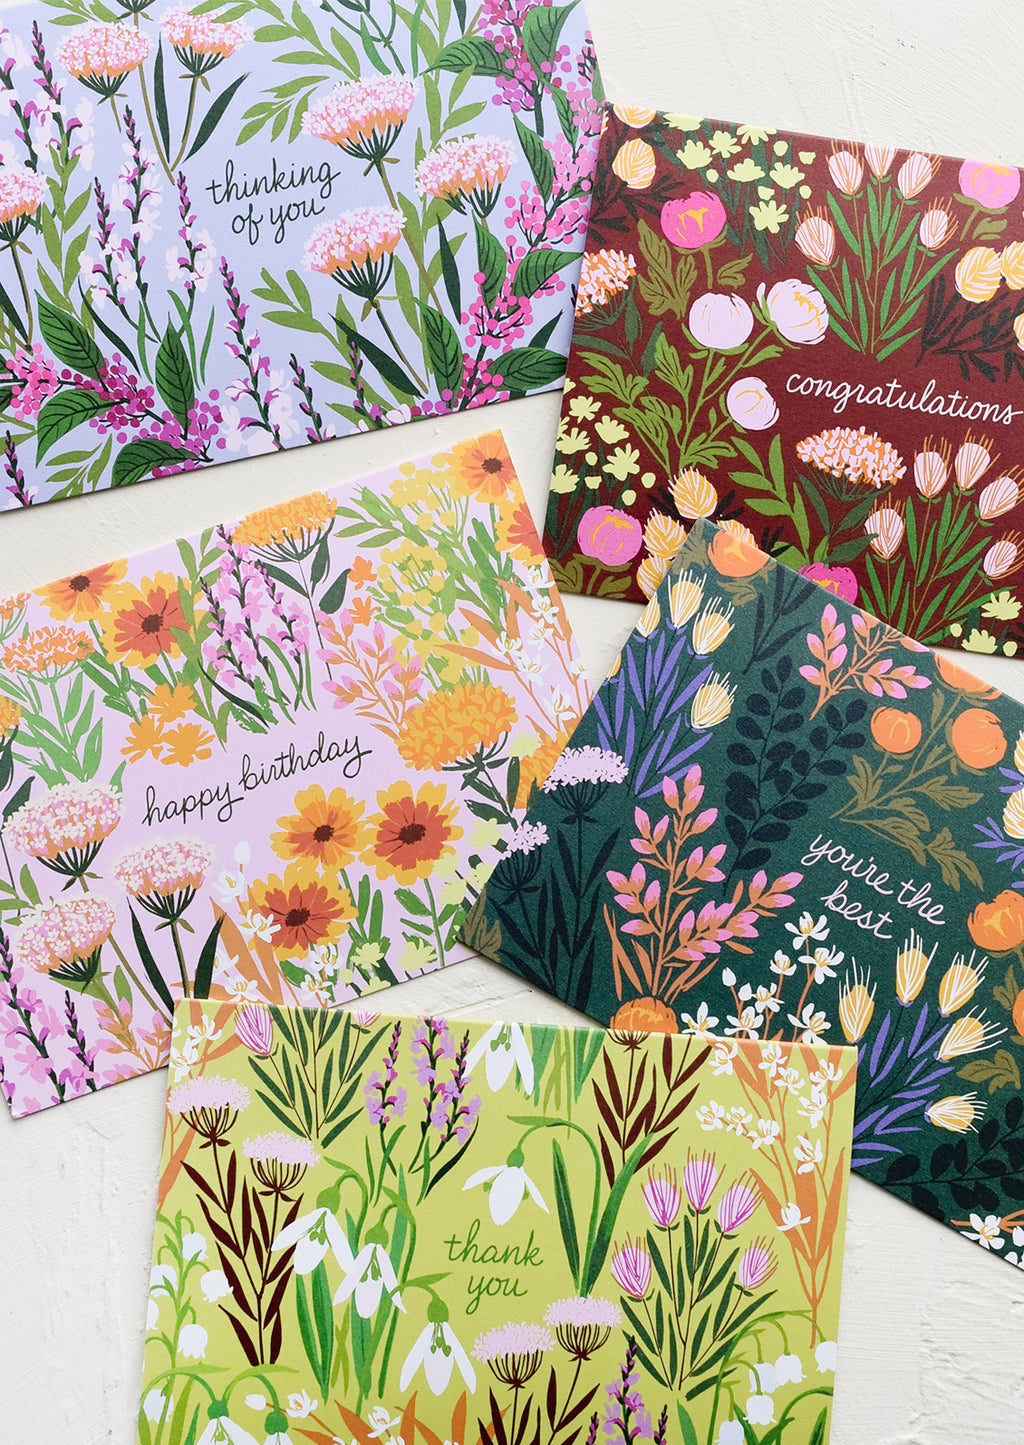 1: A set of floral printed cards for multiple occasions.